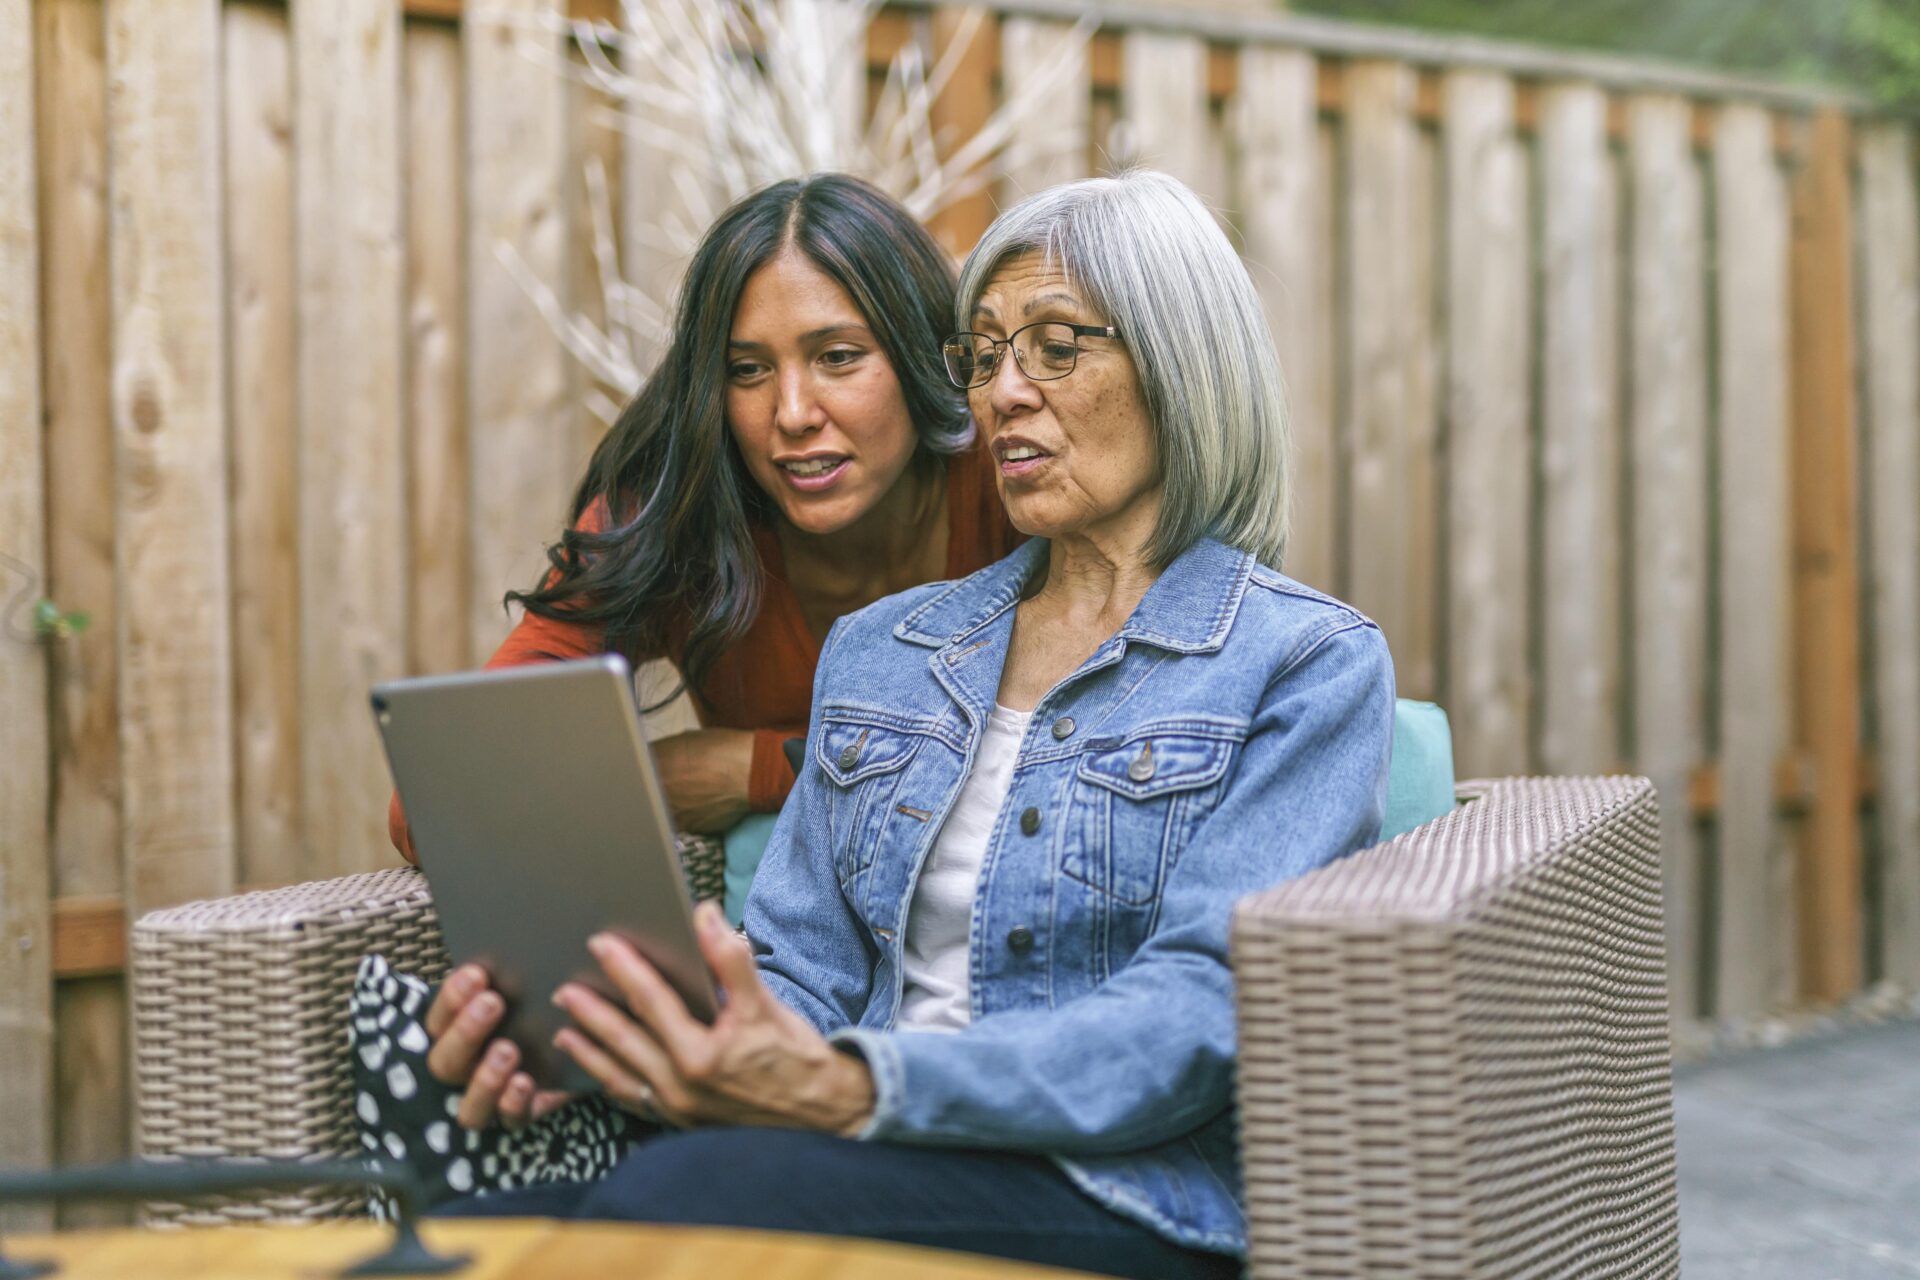 A young woman and an older woman looking at an Ipad together.